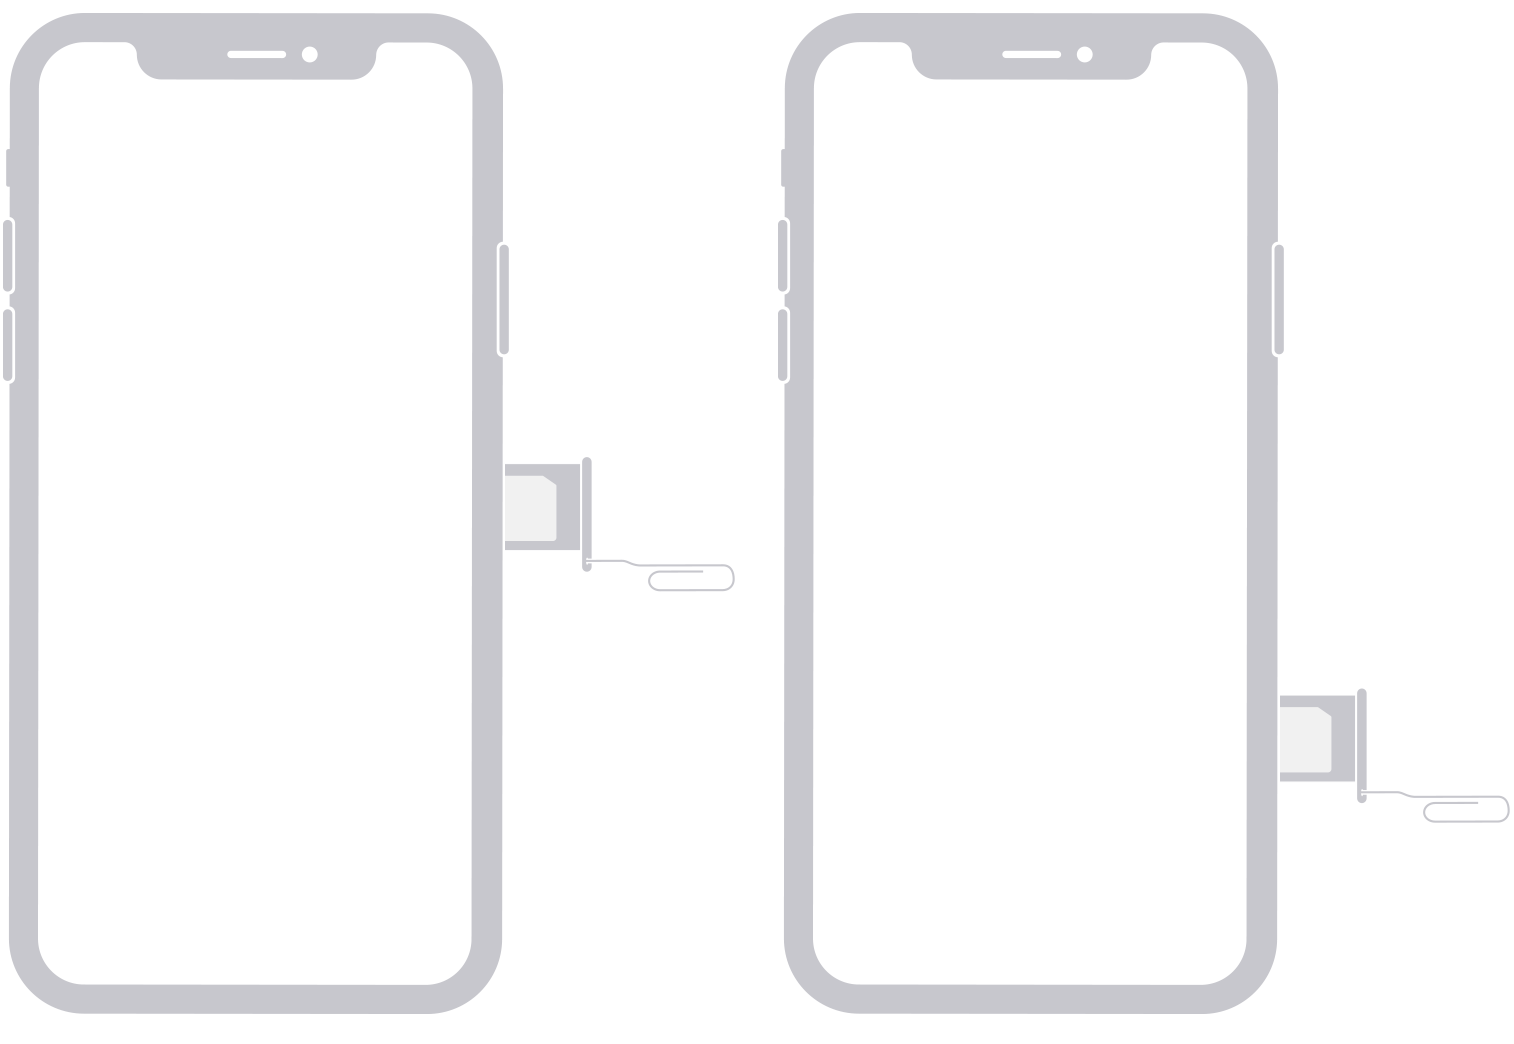 Image shows SIM on the right-hand side of iPhone